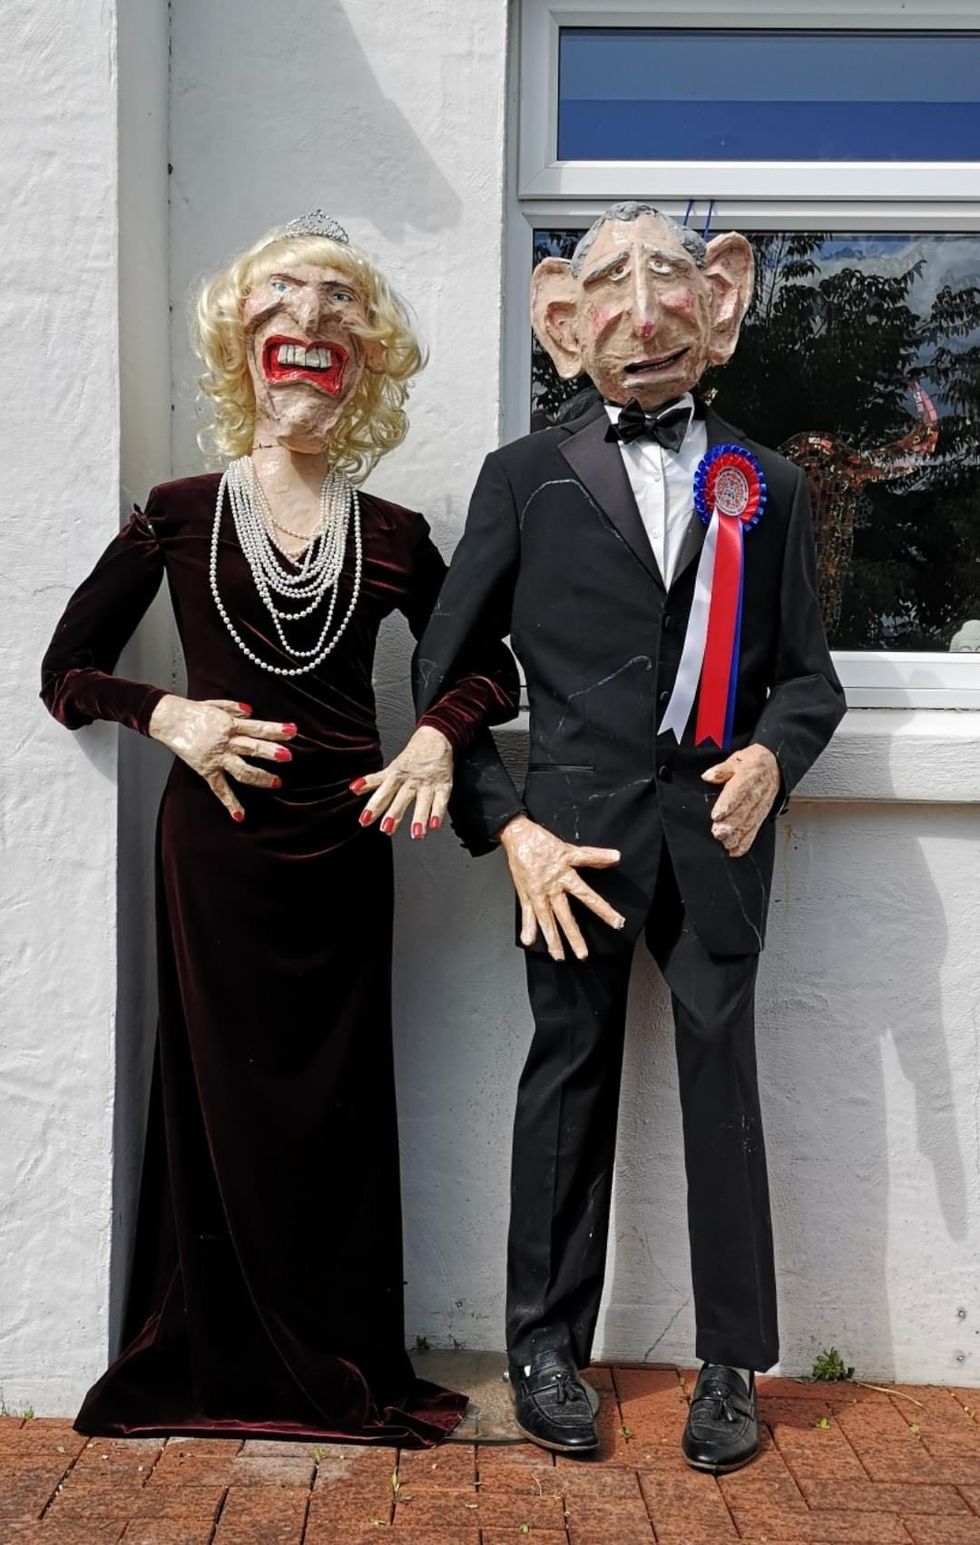 Scarecrow festival born in lockdown ‘has brought village community together’